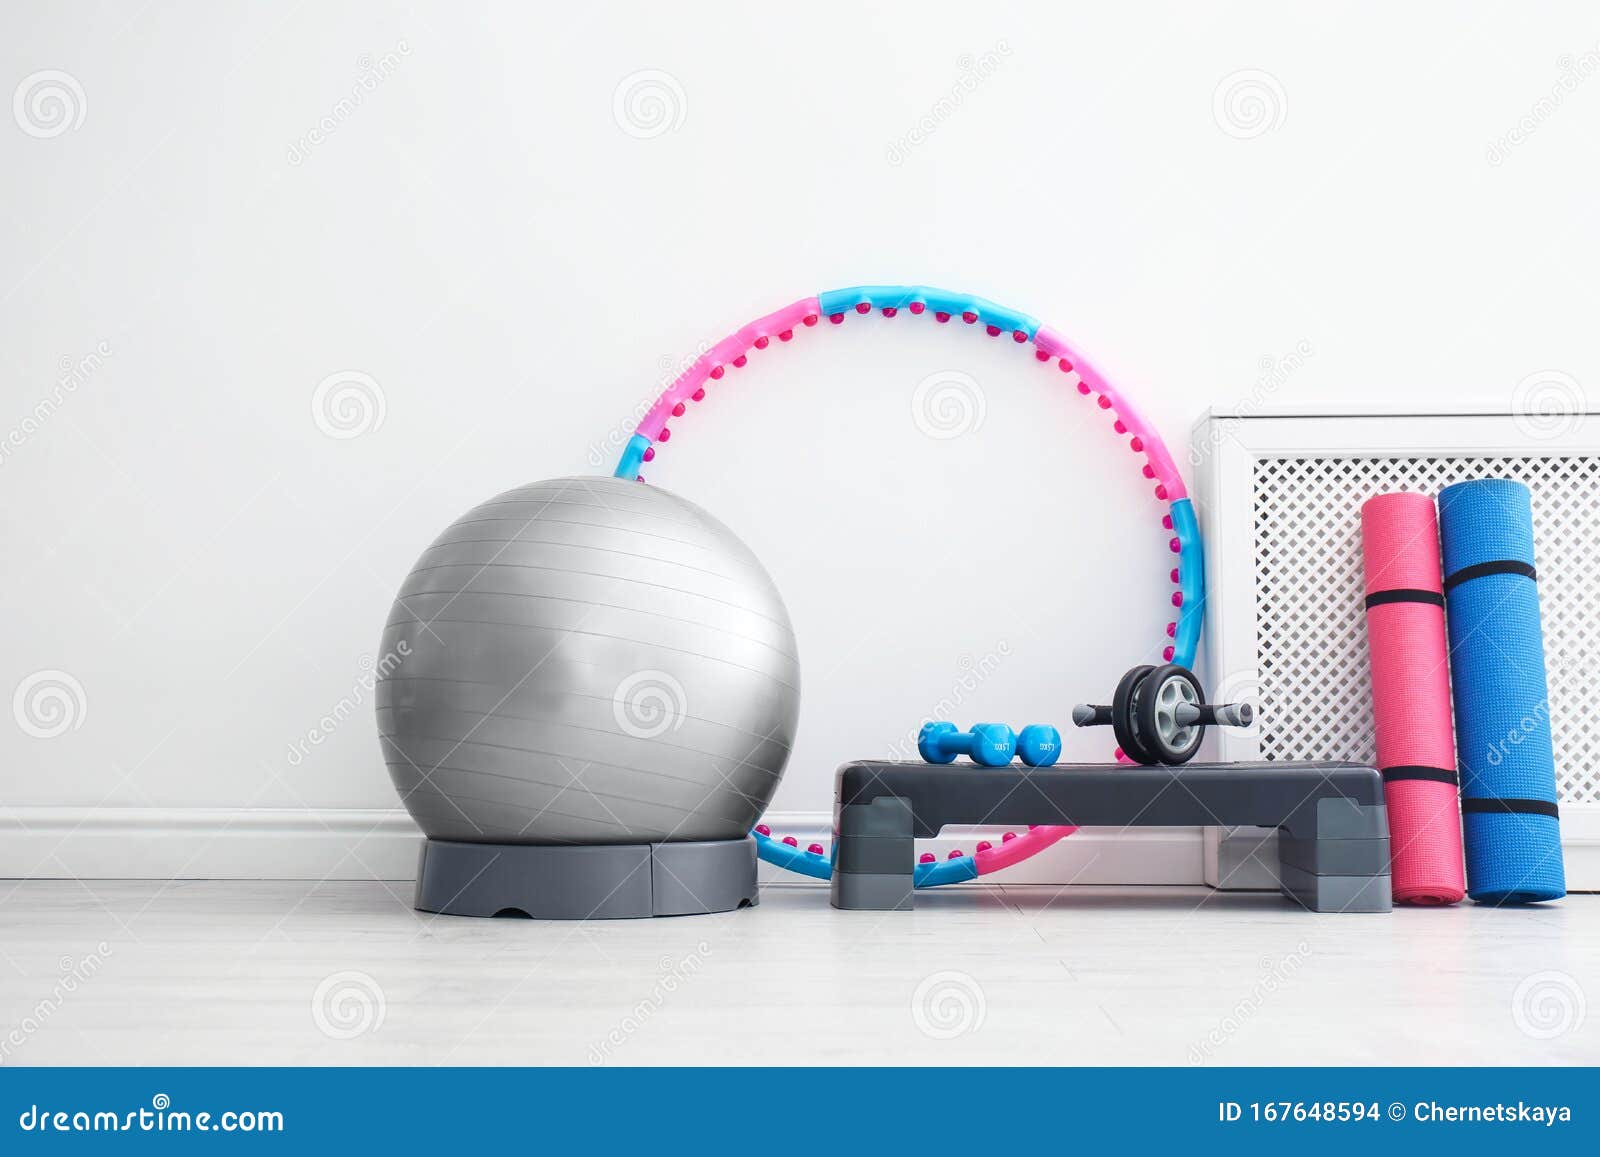 Different Sports Equipment Near Wall In Gym Stock Photo - Image of mats, items: 167648594